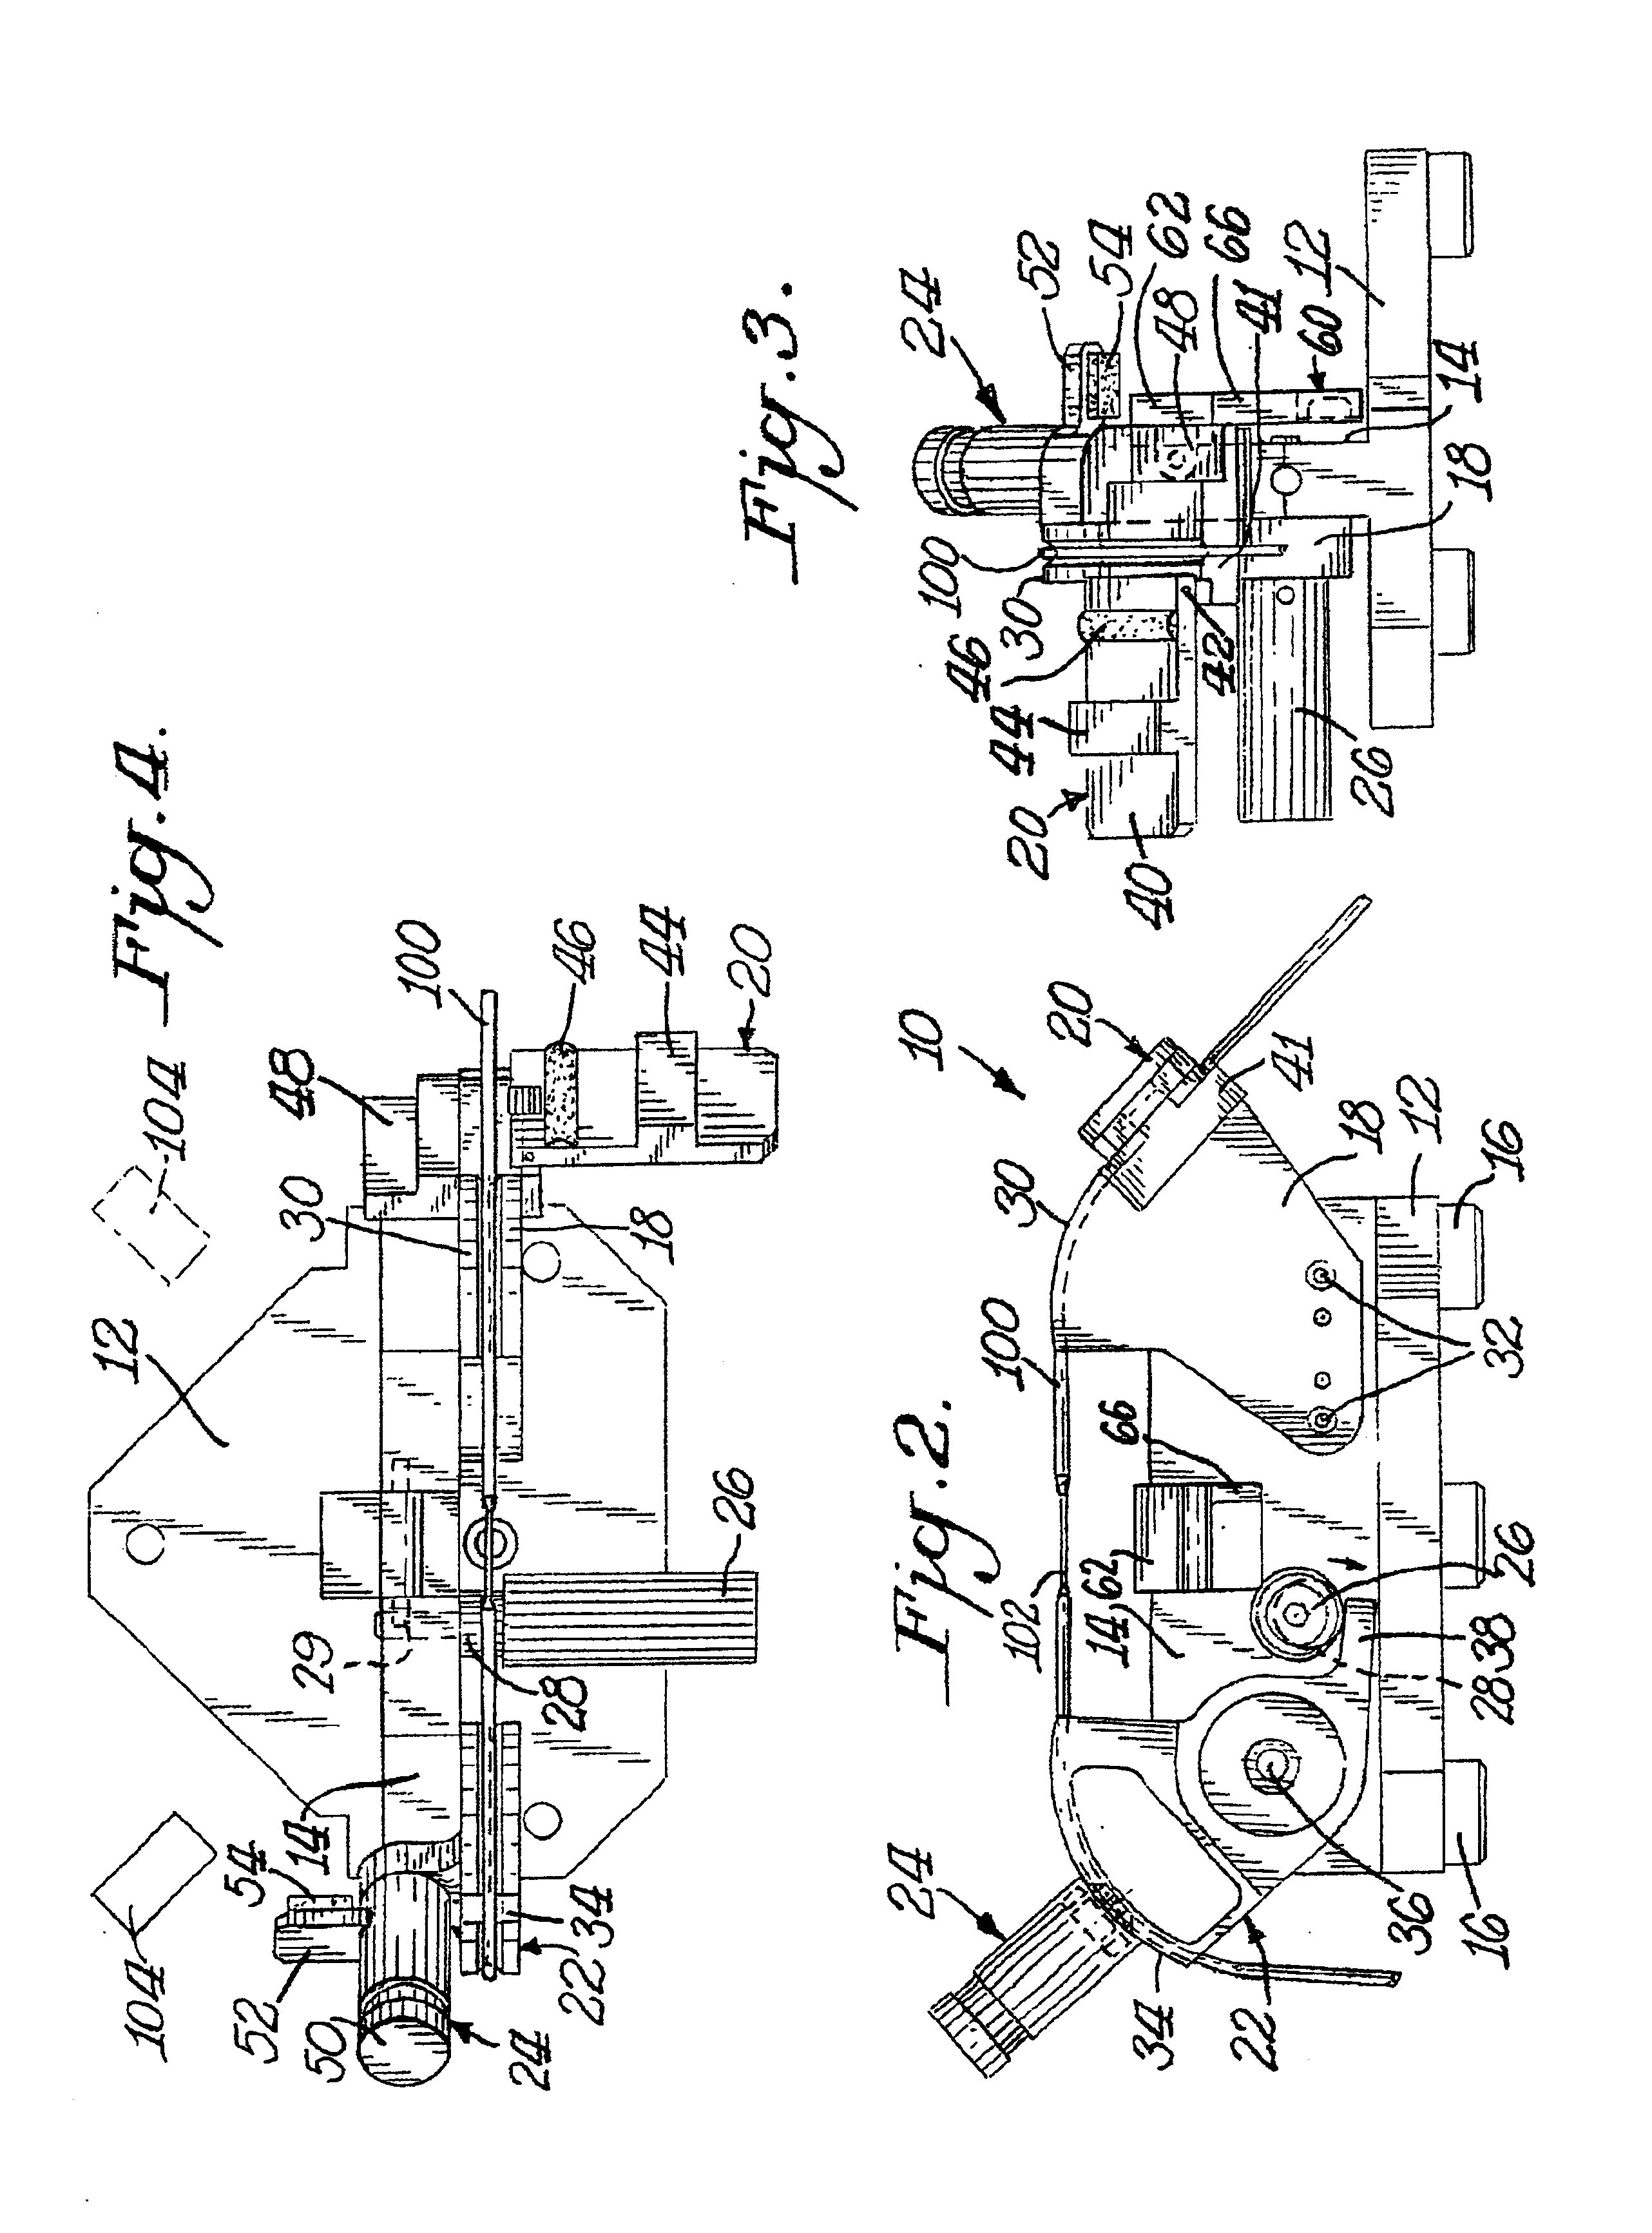 Method for tensioning and positioning a fiber optic cable